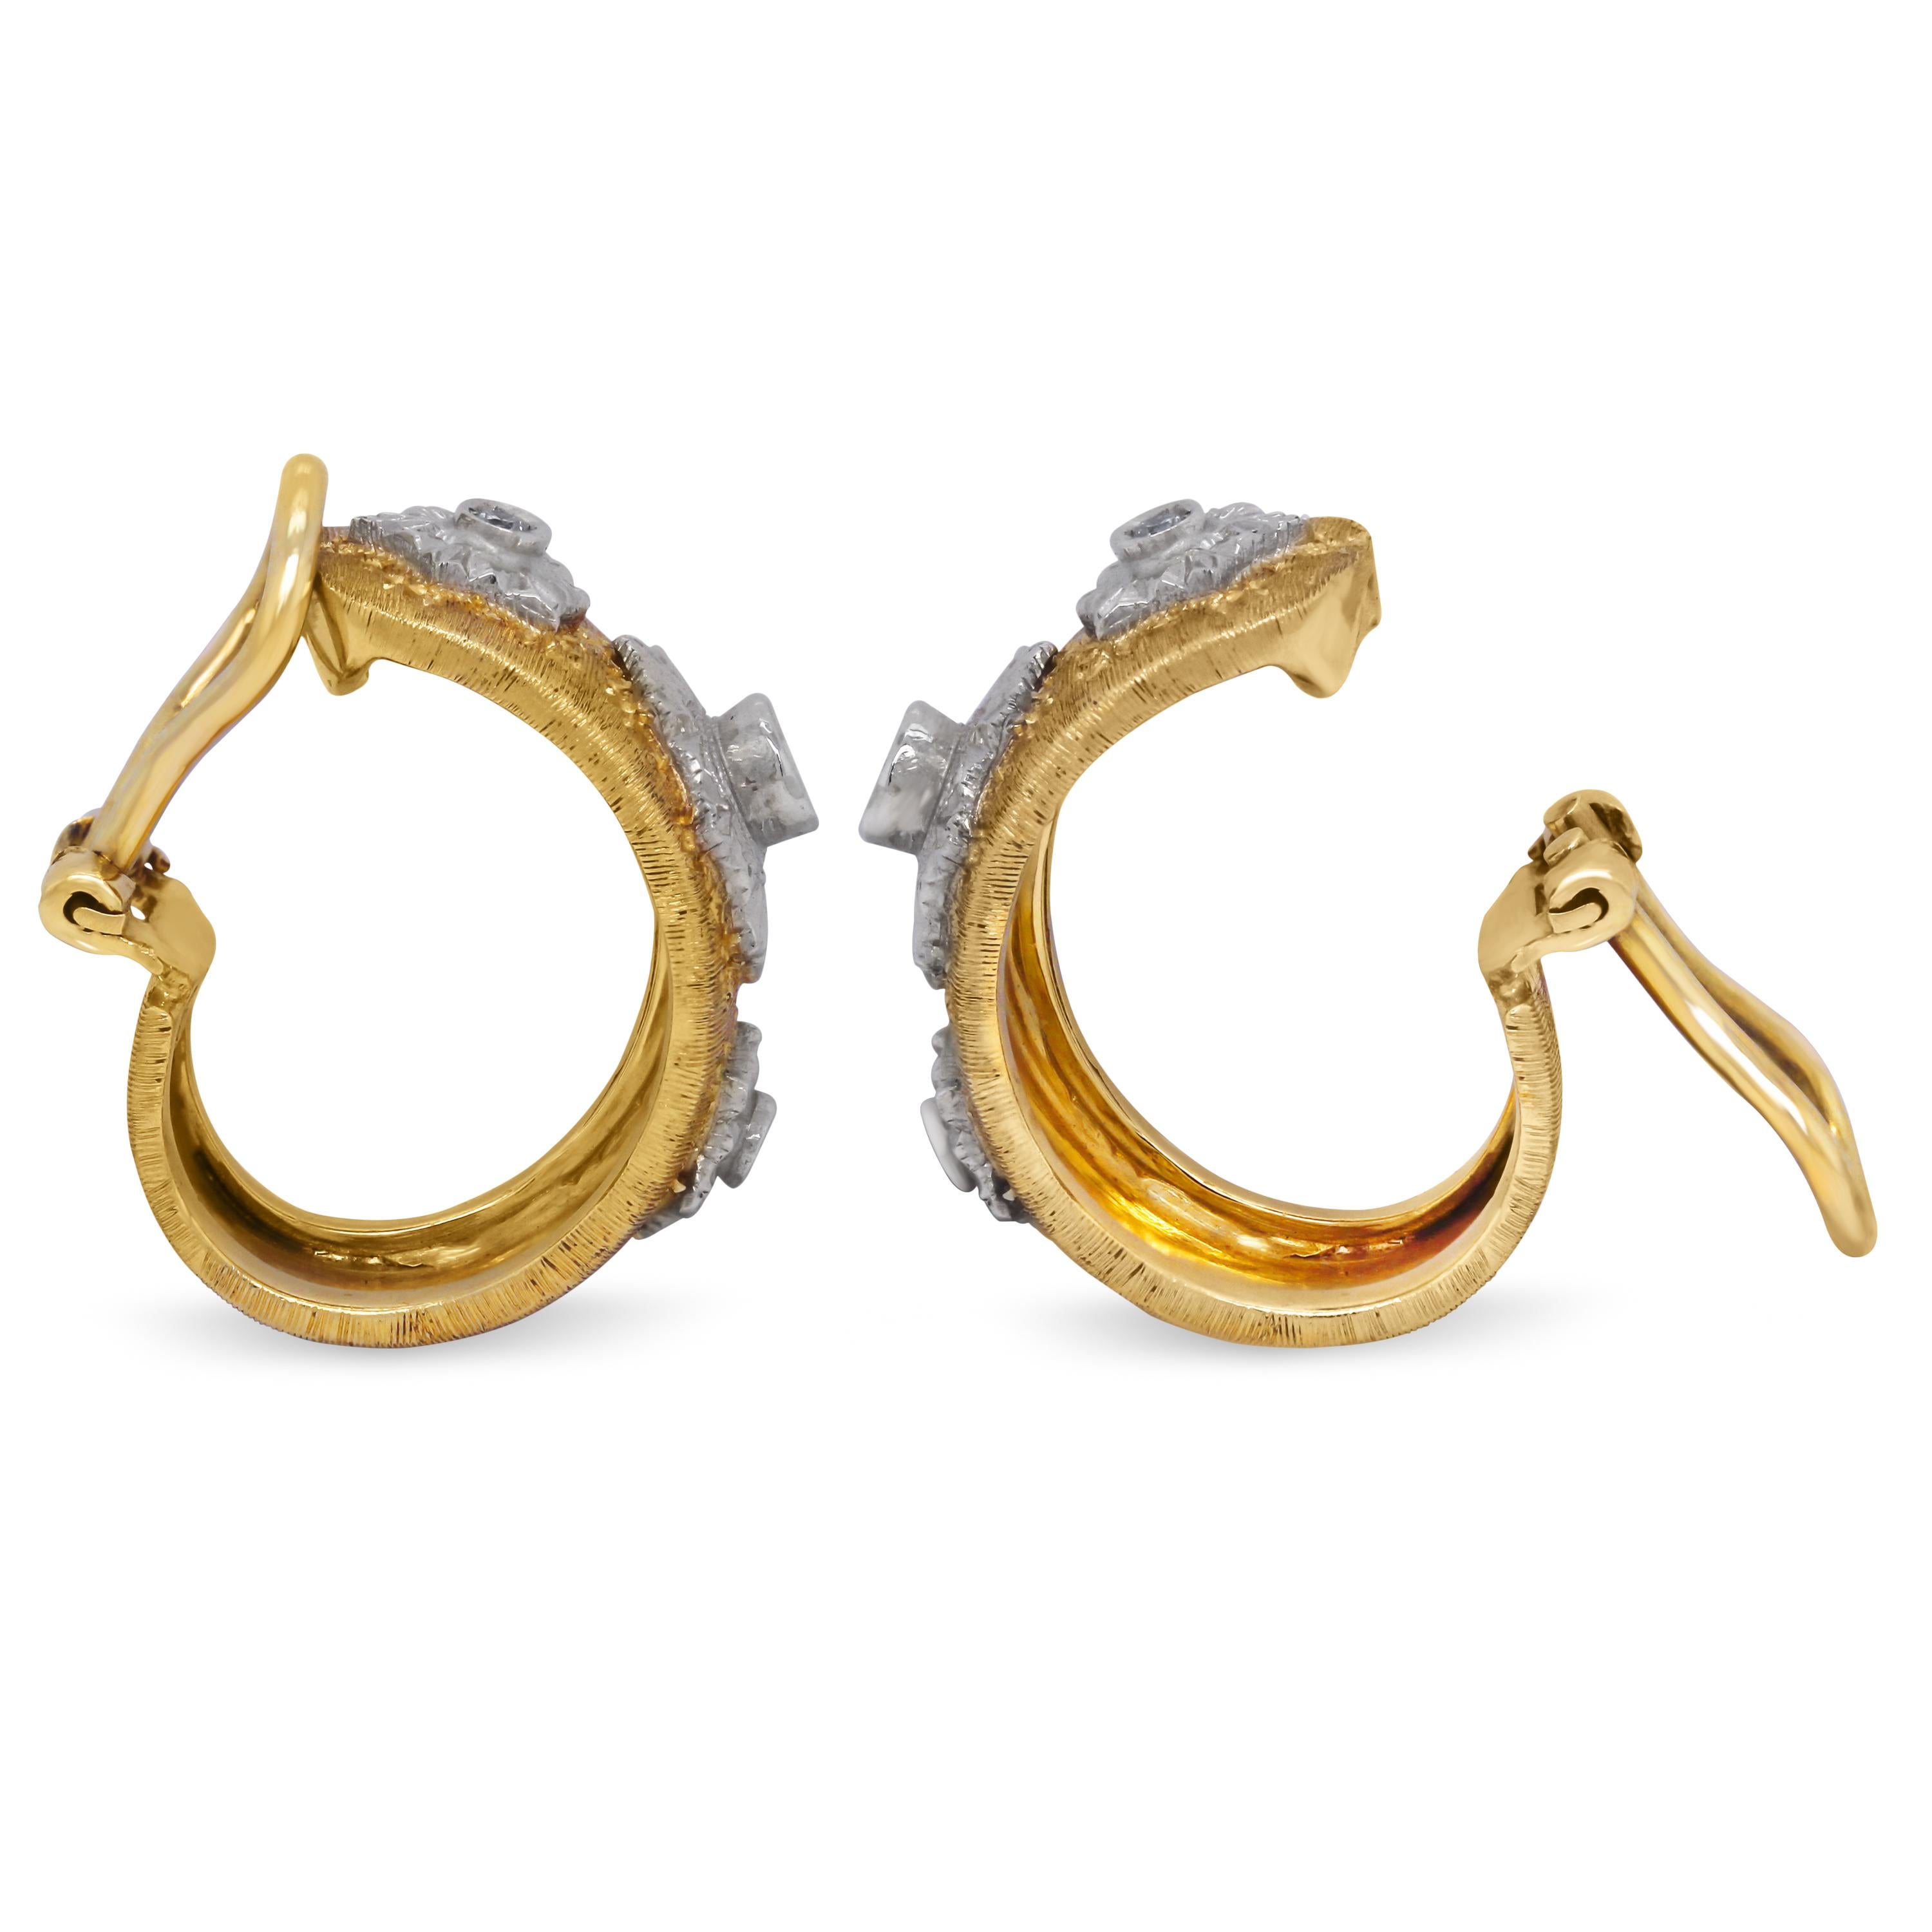 18K Yellow White Two Tone Gold Diamond Hammered Finish Hoop Earrings

These unique earrings feature a hammered gold finish with diamonds set in 18k white gold.

Earrings are 0.84 inch by 0.40 inch.

Apprx. 0.30 carat G color, VS clarity diamonds